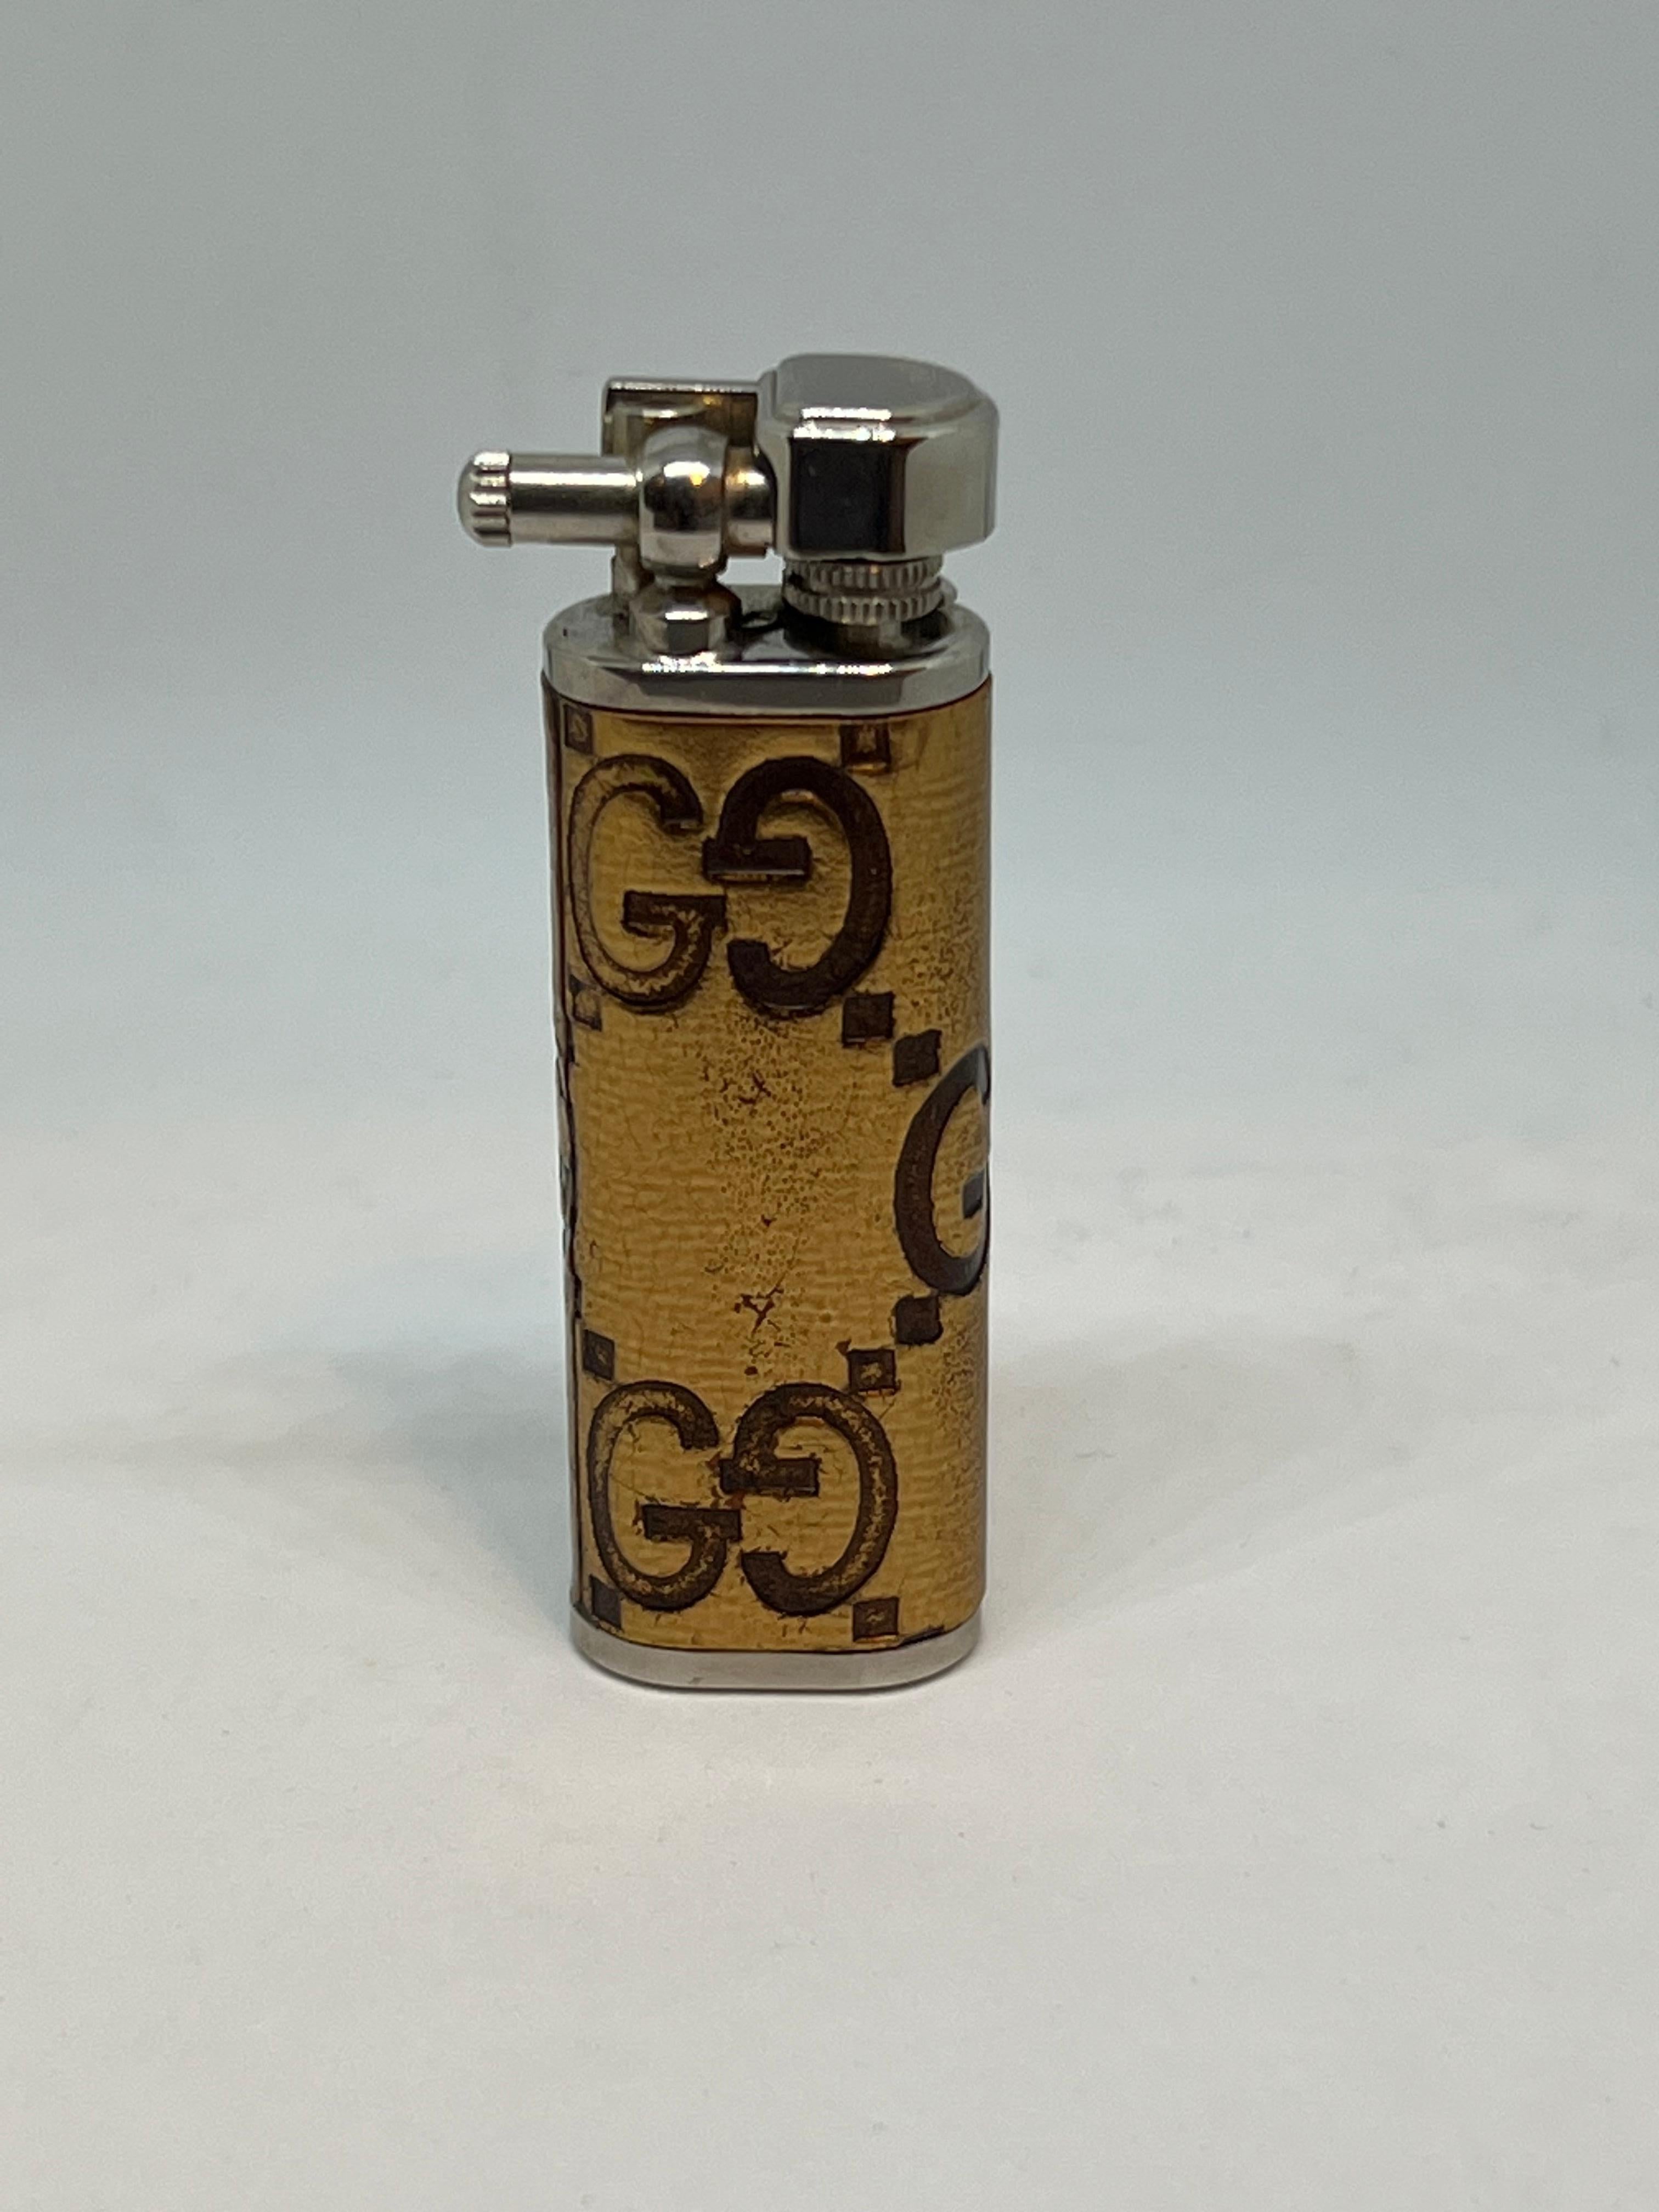 Retro & Vintage “Gucci” Gold Lather Lighter 80’s circa In Excellent Condition For Sale In New York, NY